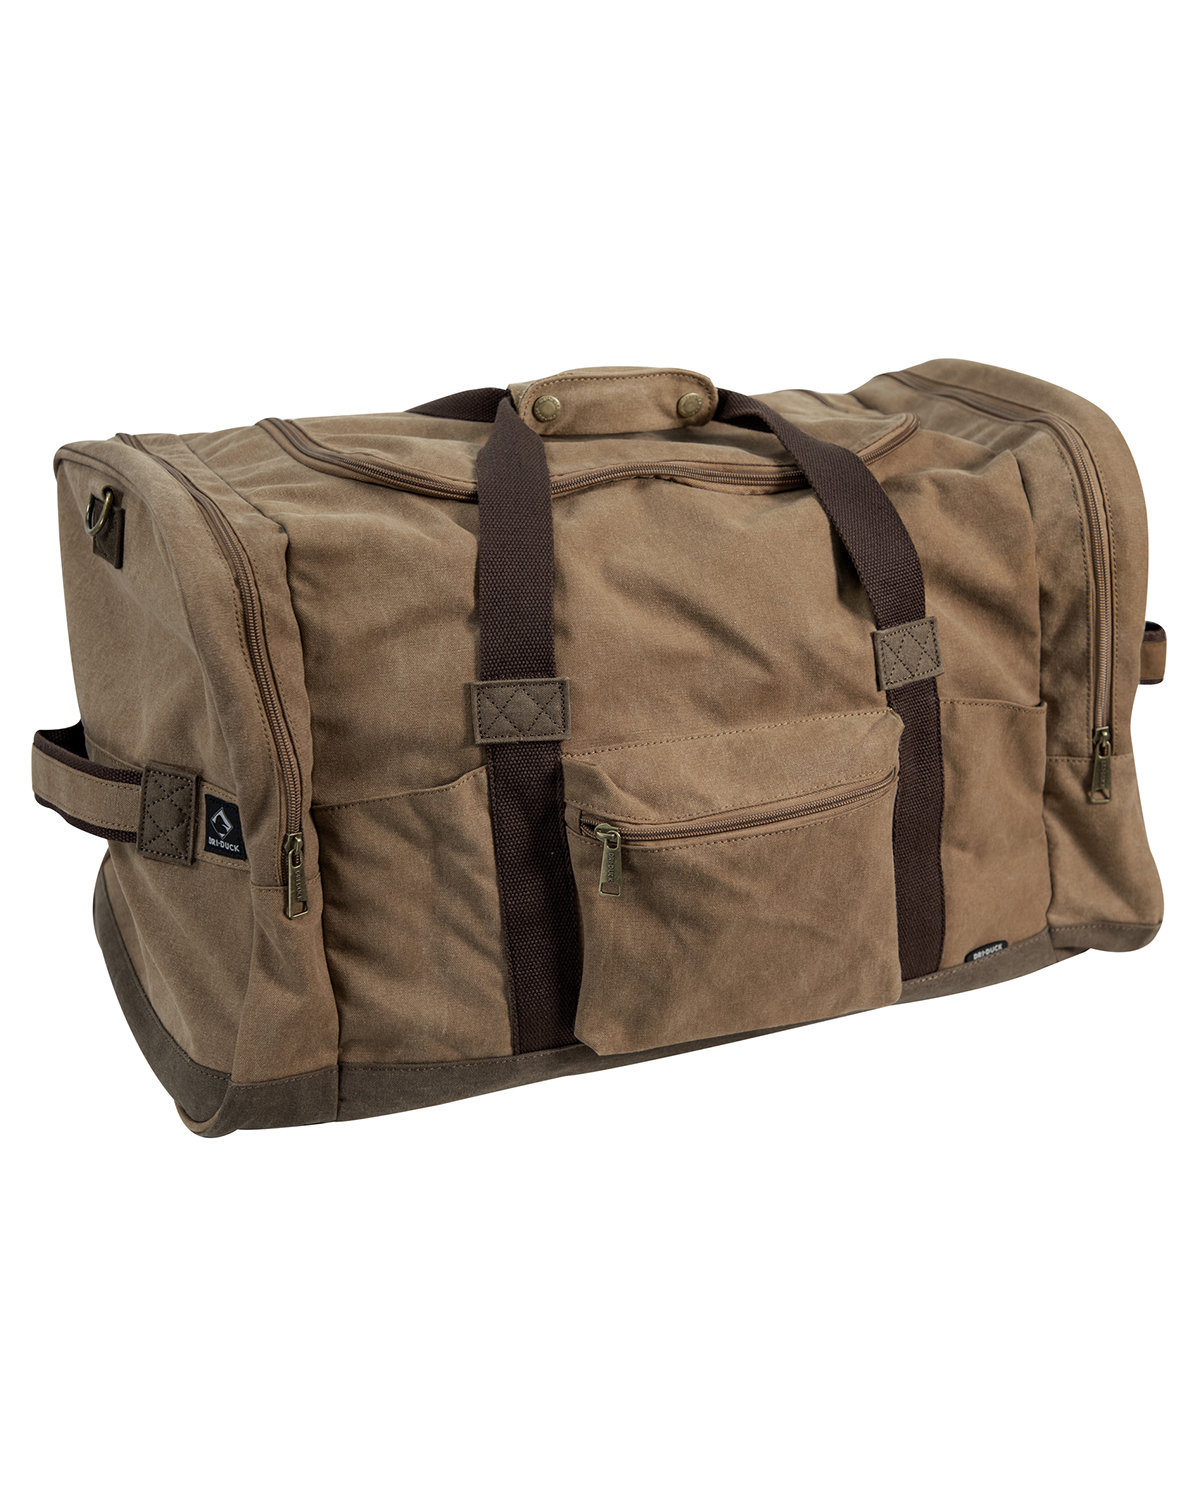 Buy Heavy Duty Large Expedition Canvas Duffle Bag - Dri Duck Online at ...